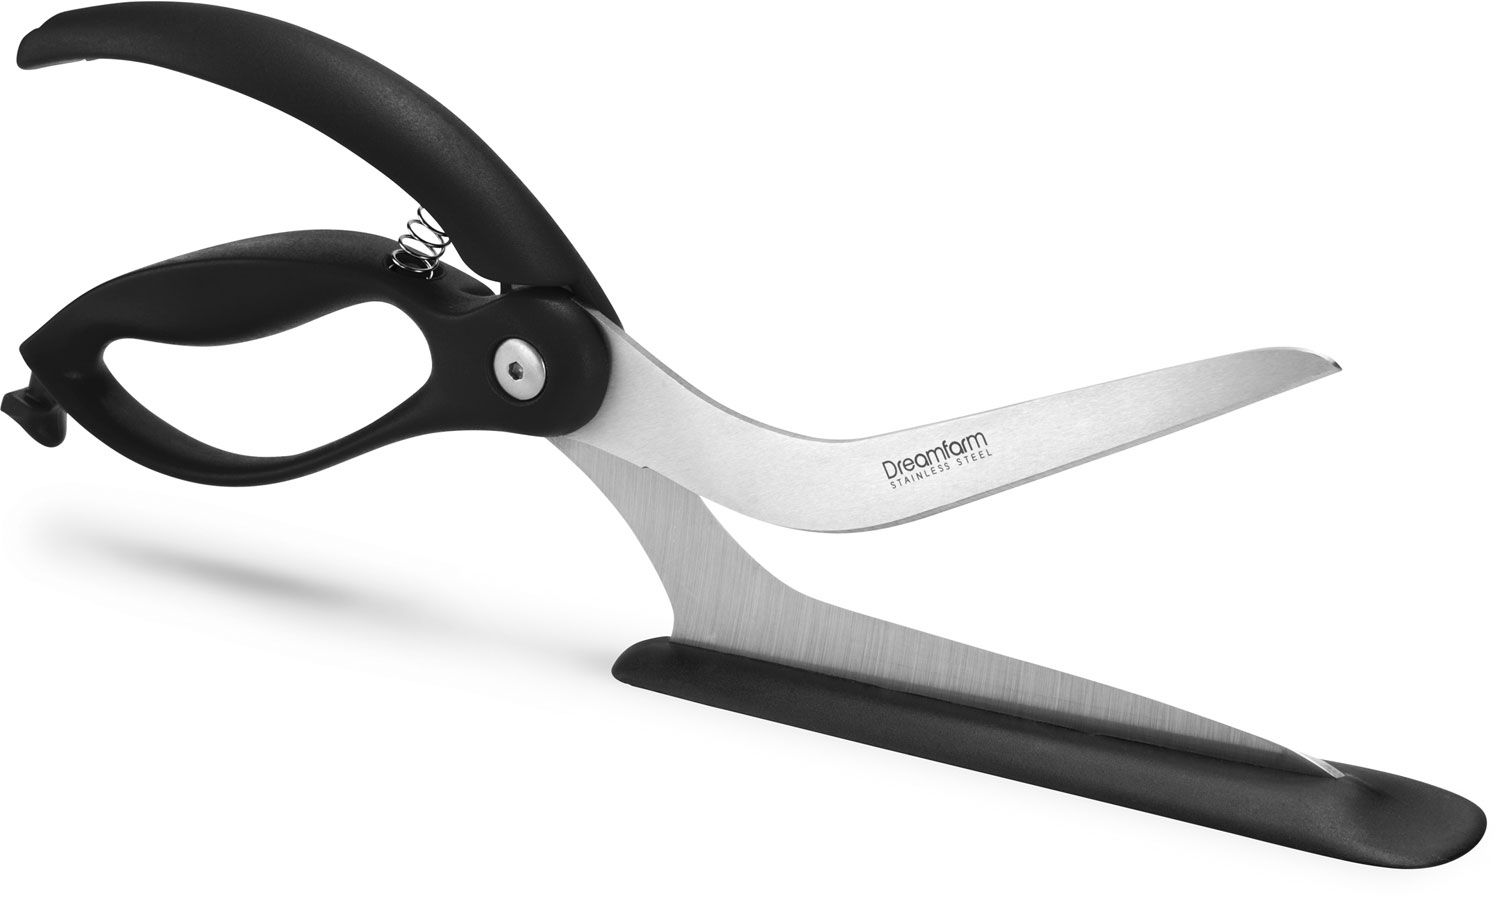  Dreamfarm Scizza, Non-Stick Pizza Scissors with Protective  Server, Stainless Steel, All-In-One Pizza Slicer, Easy-To-Use &  Easy-To-Clean Pizza Cutters